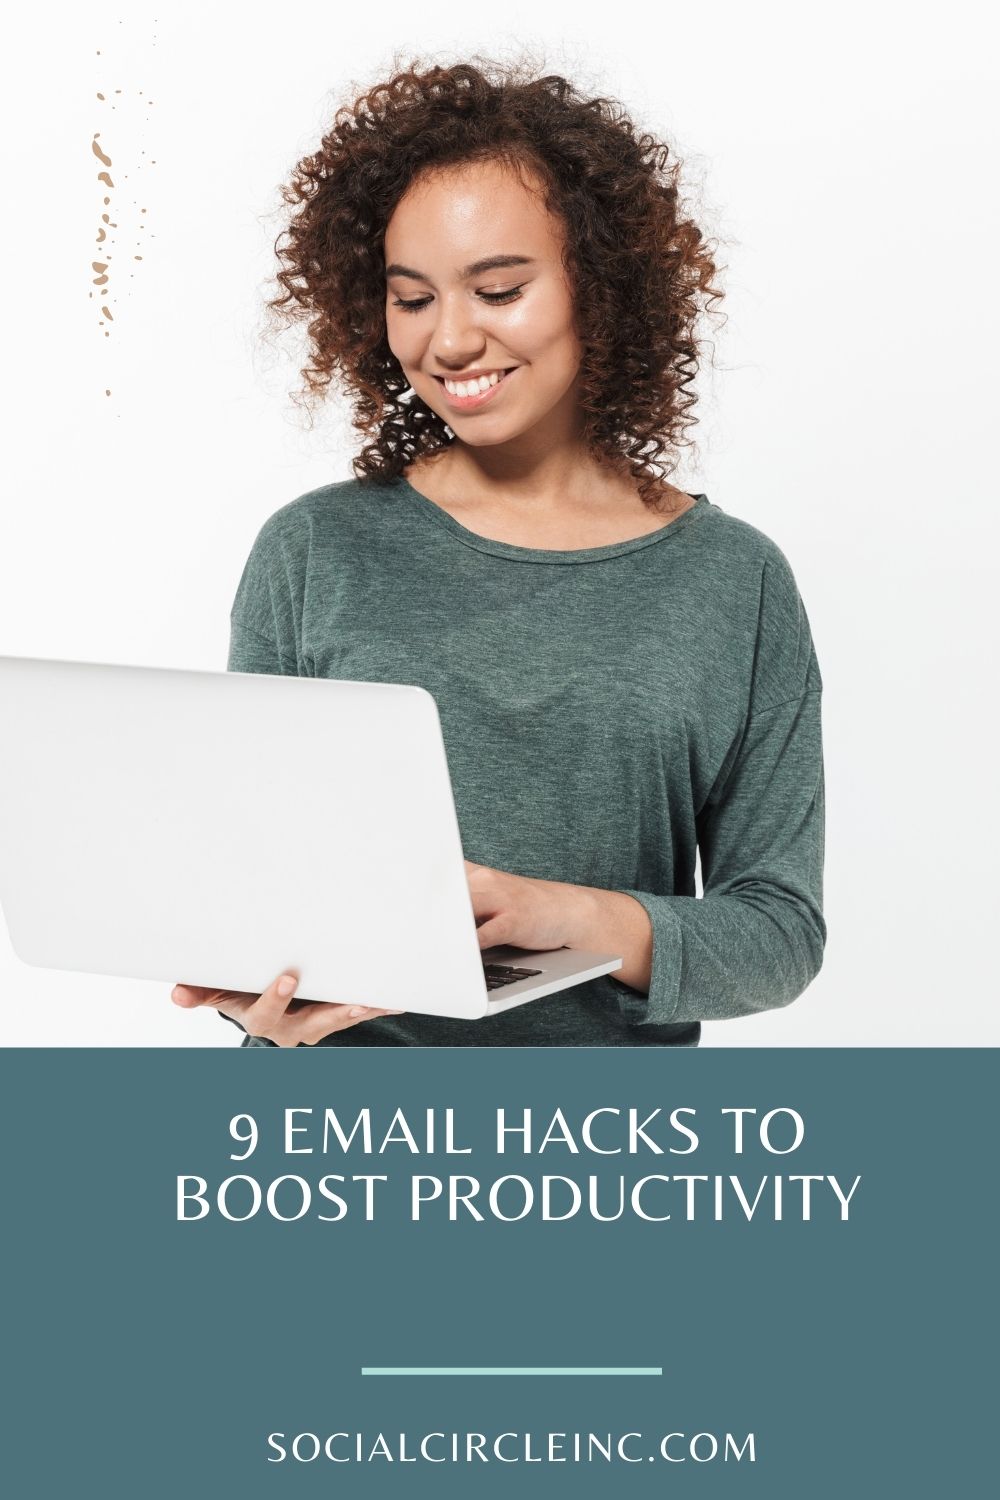 Email Hacks to Boost Productivity